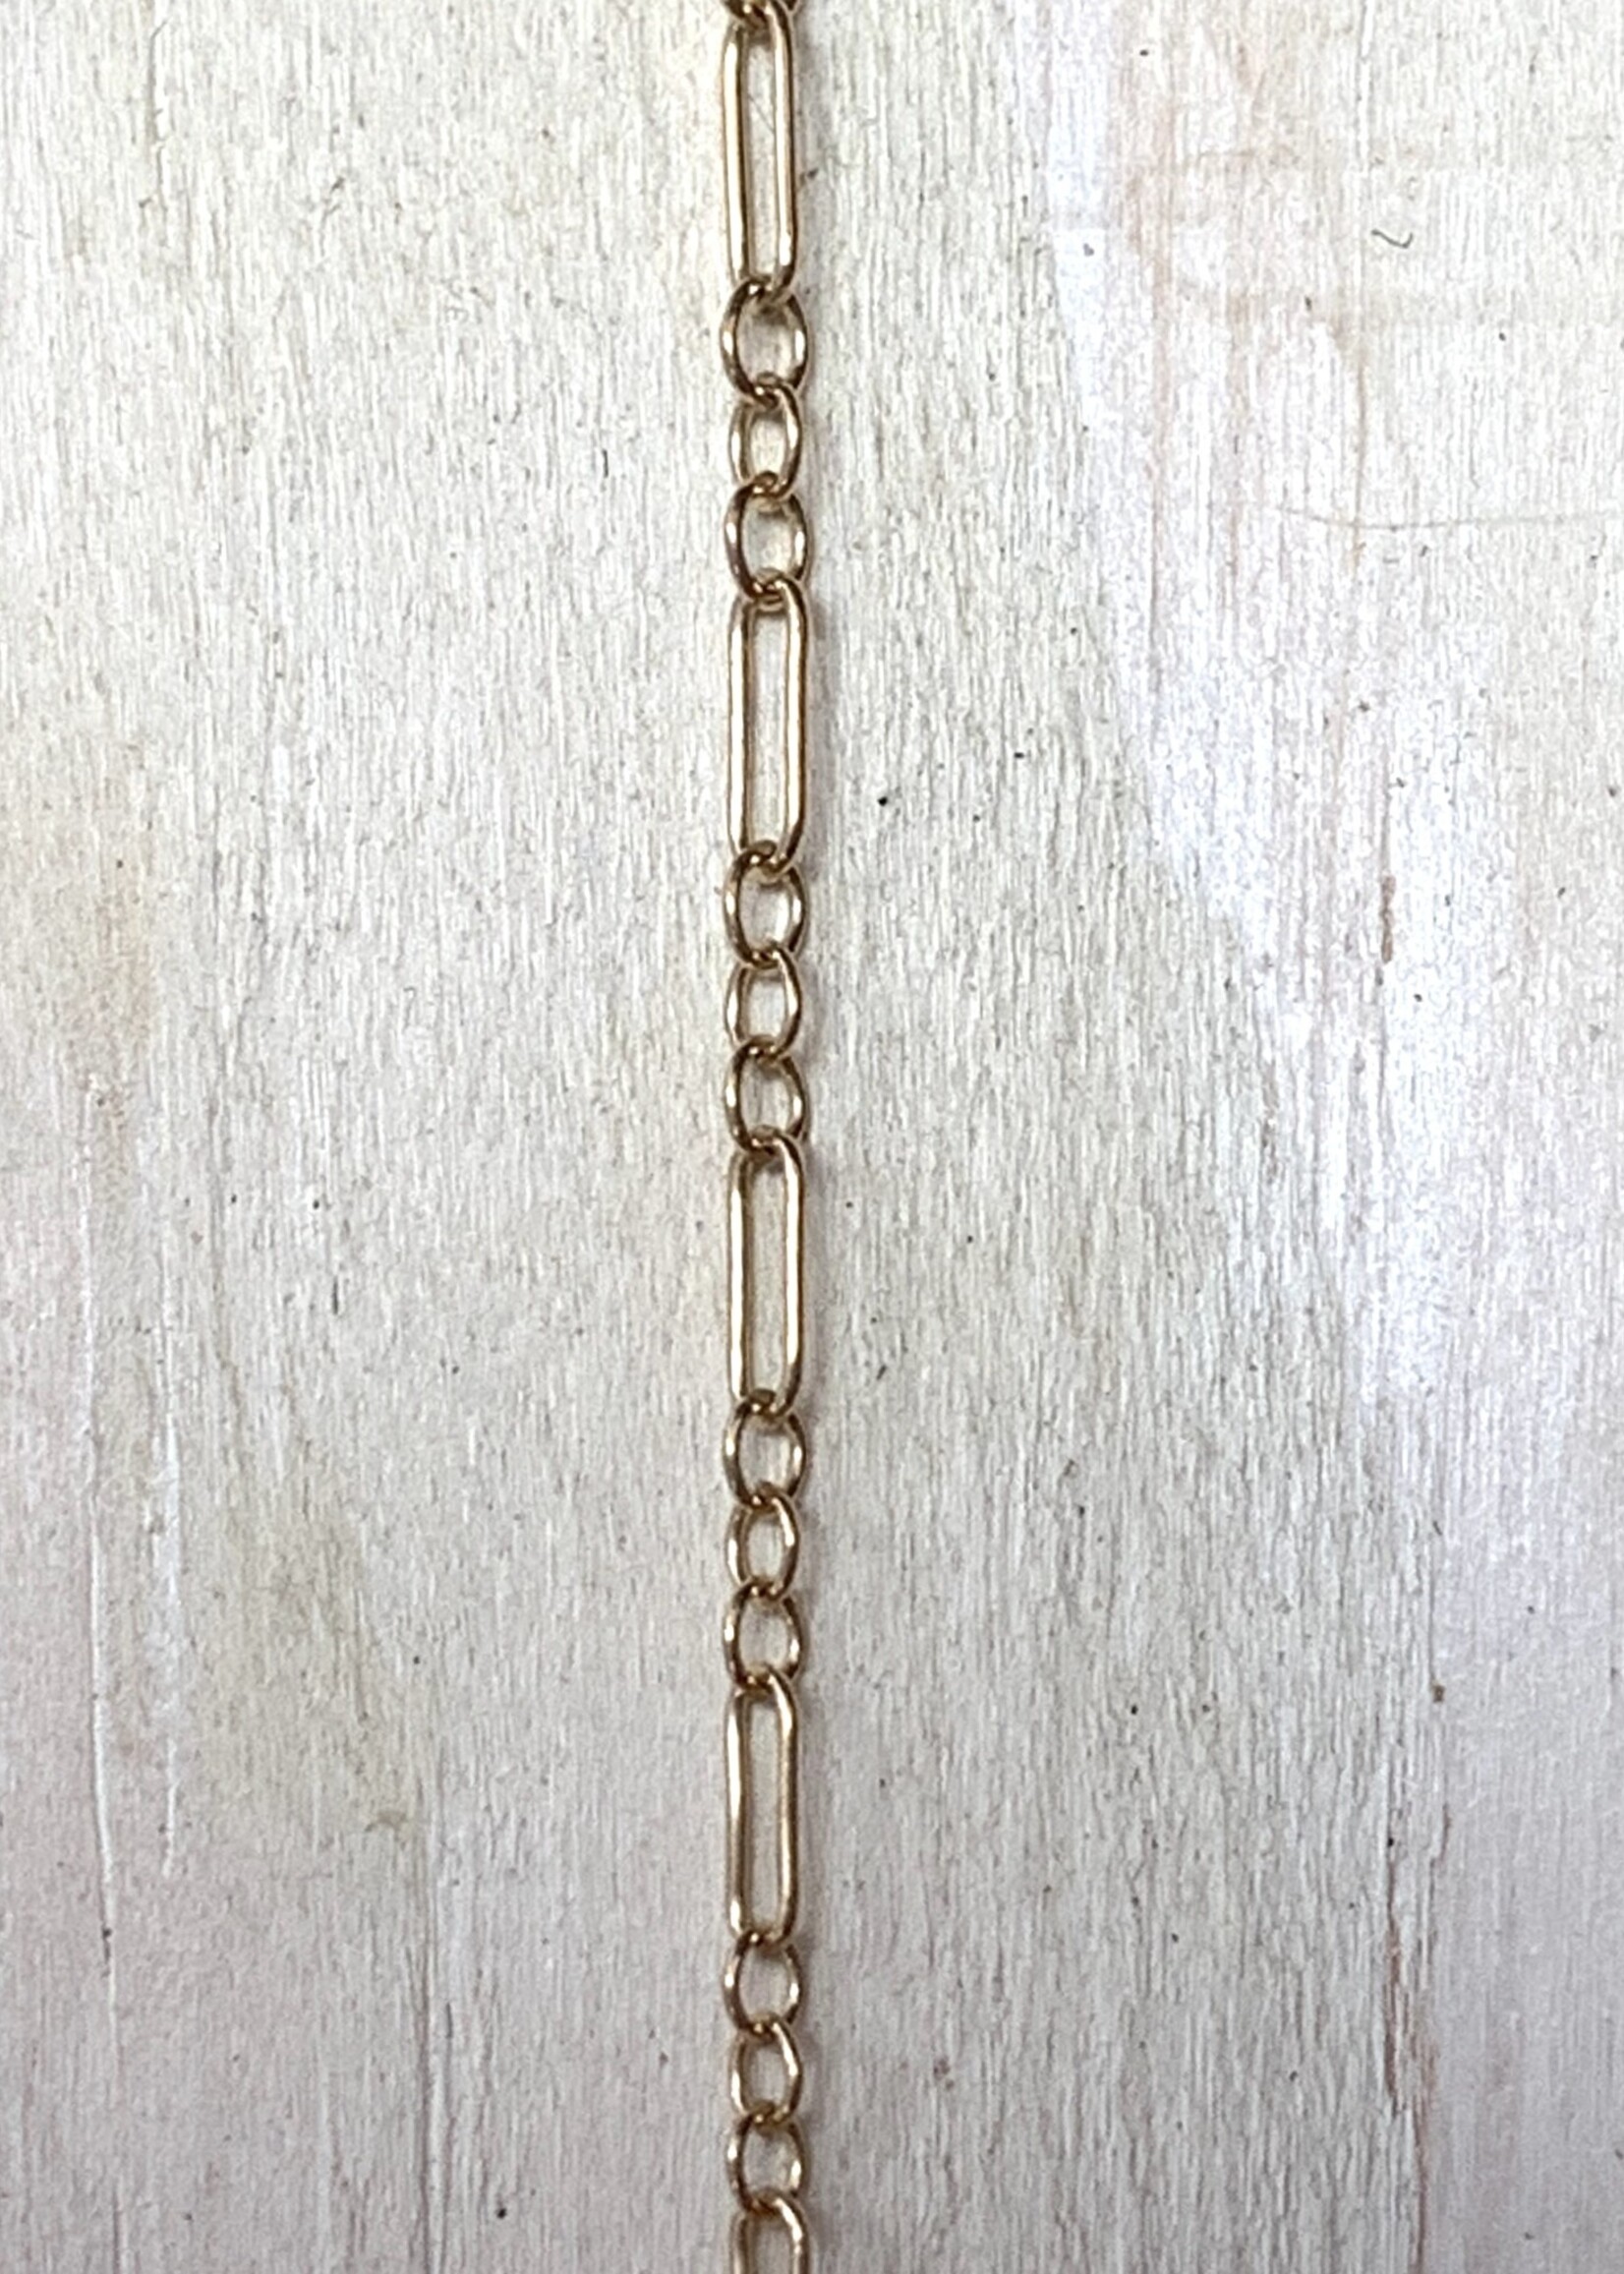 4.7 x 1.6mm Long Short Chain 14k Gold Filled Inch